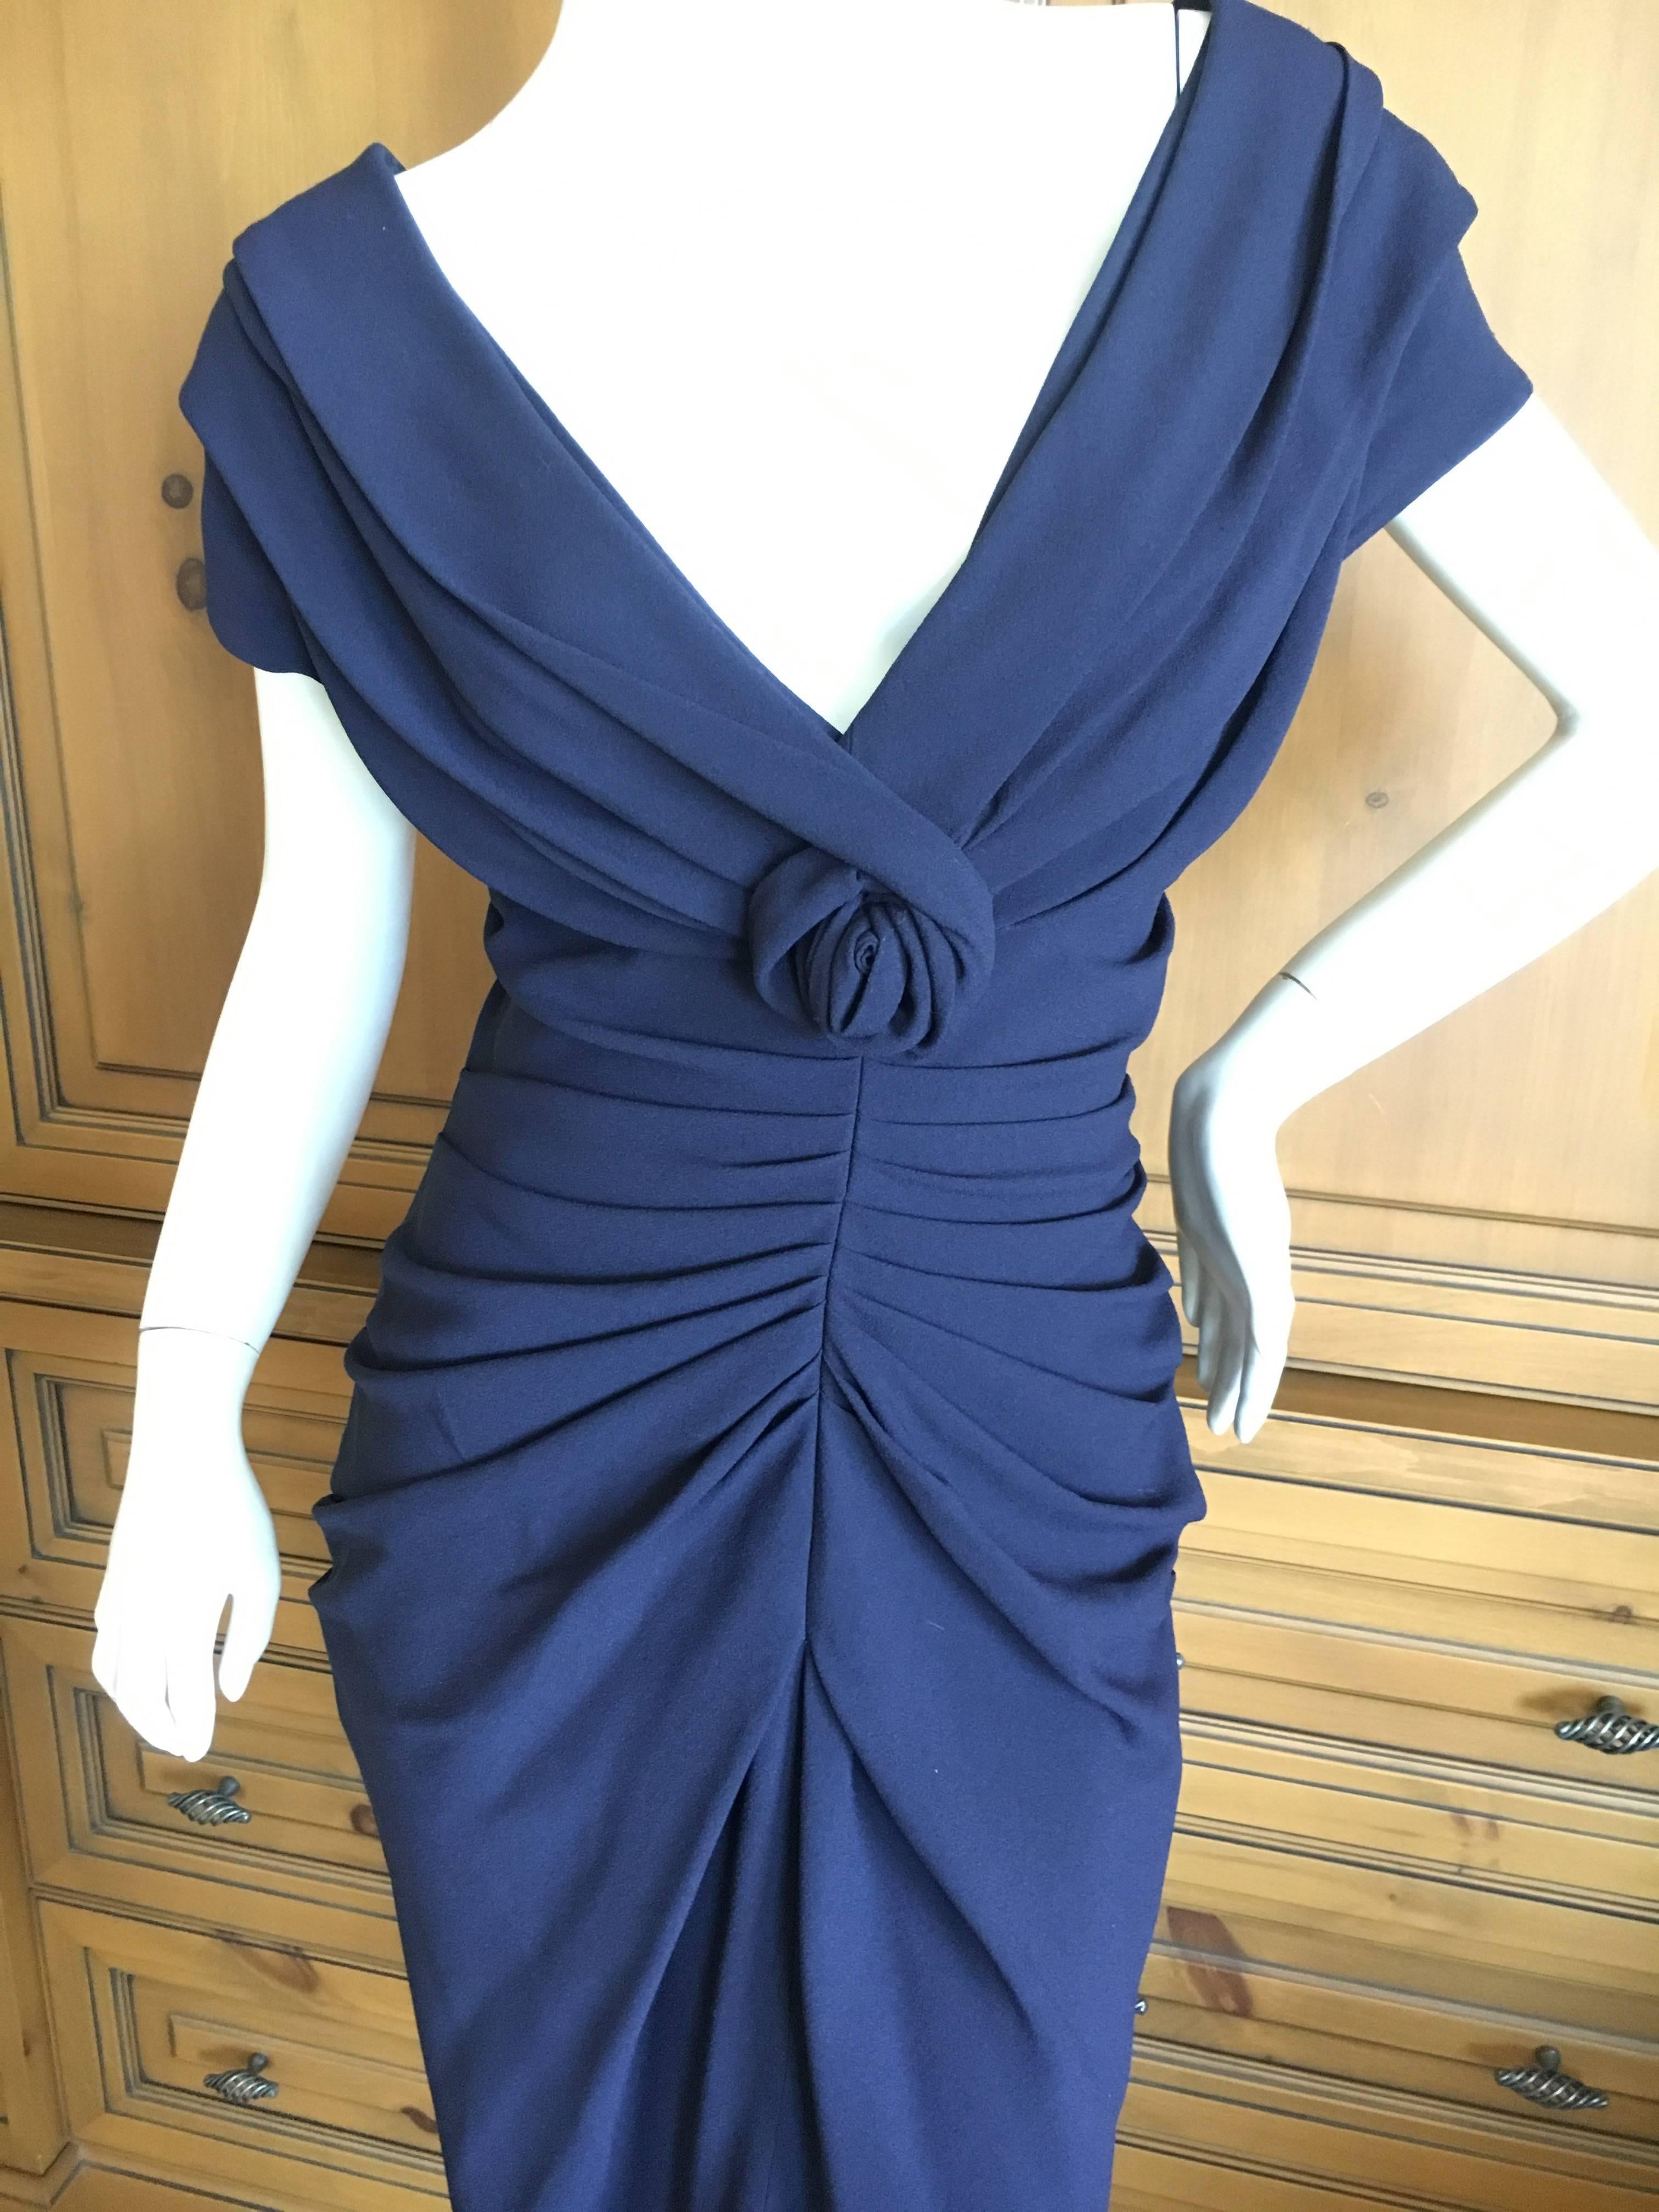 Christian Dior by John Galliano Low Cut Navy Blue Cocktail Dress.
Lined in silk.
Size 38
Bust 42